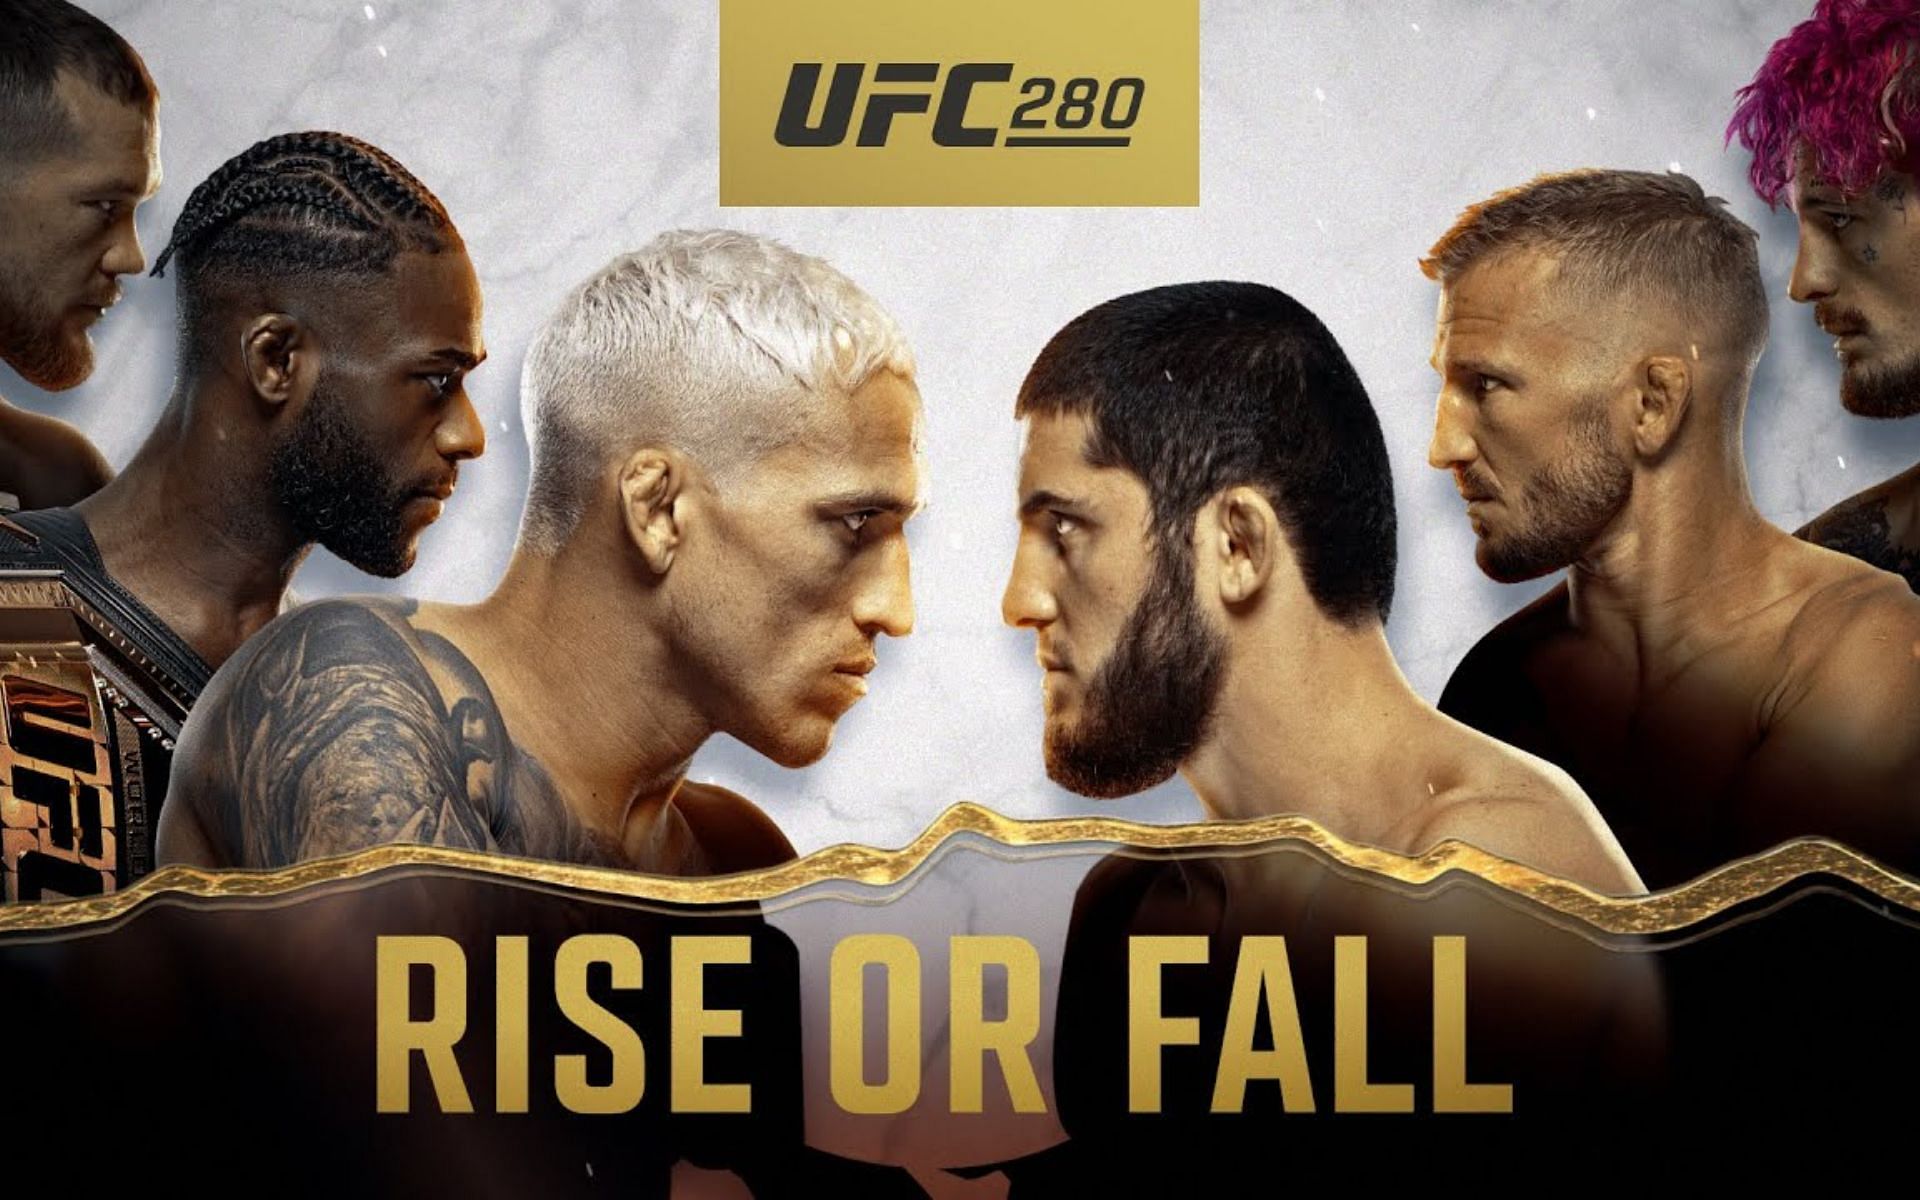 Could UFC 280 prove to be an all-time classic?